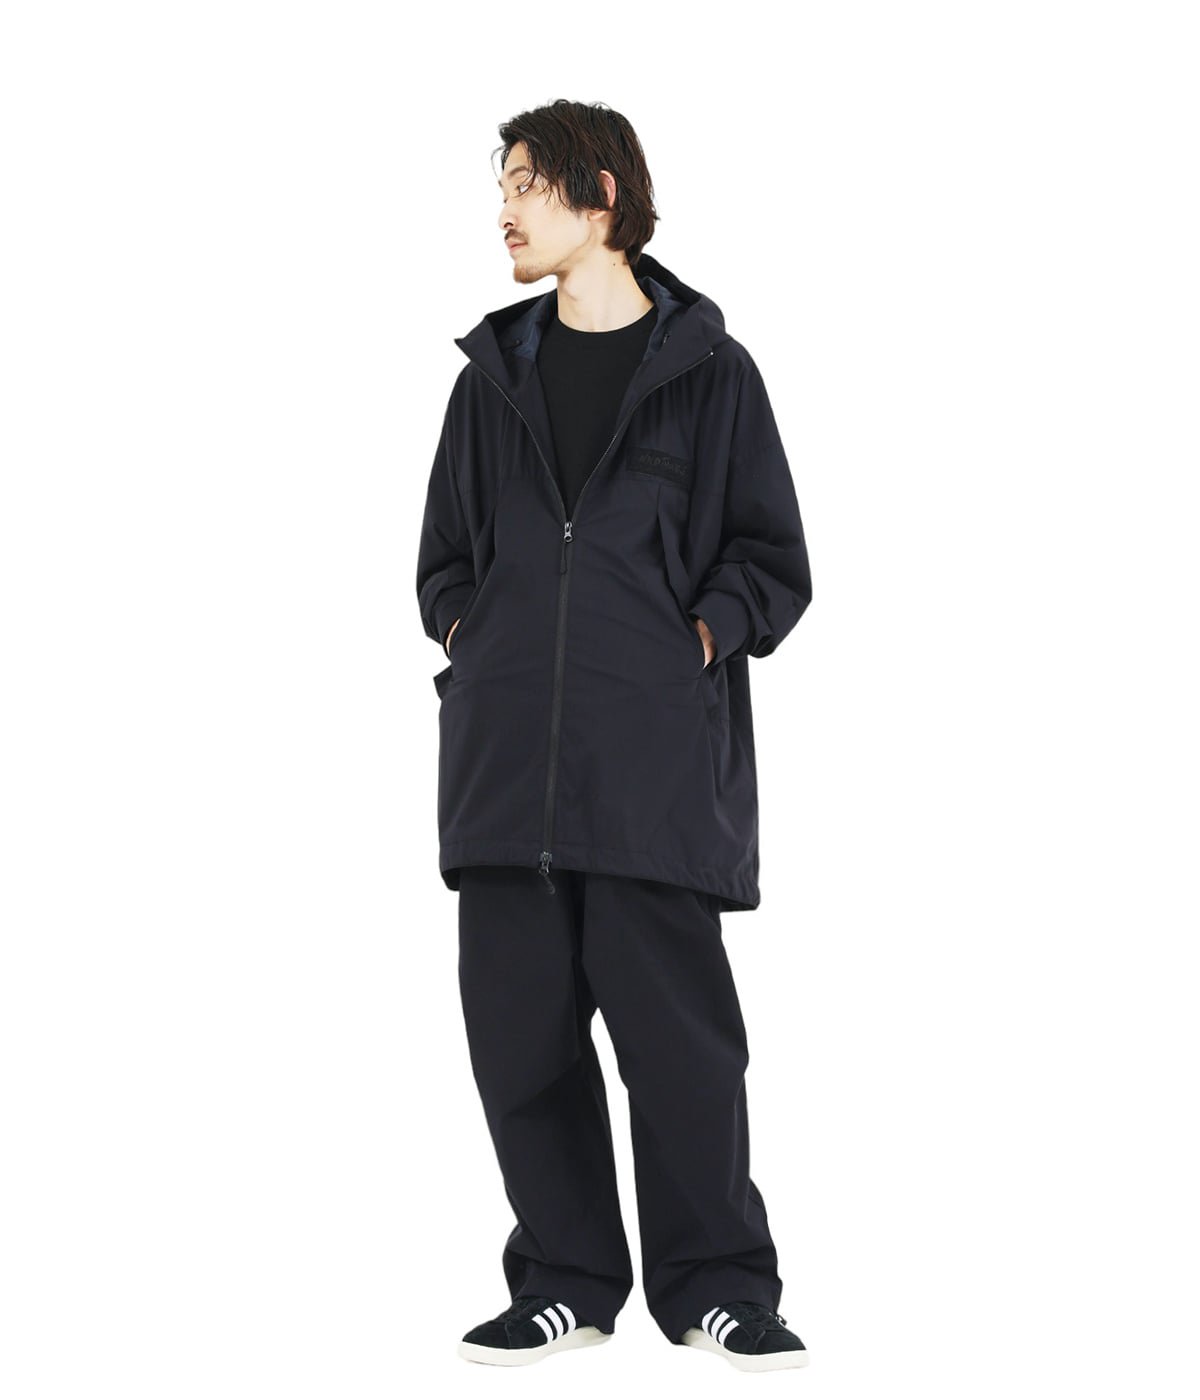 WILDTHINGS FIELD OVER COAT - partex shield 3layer nylon rip stop